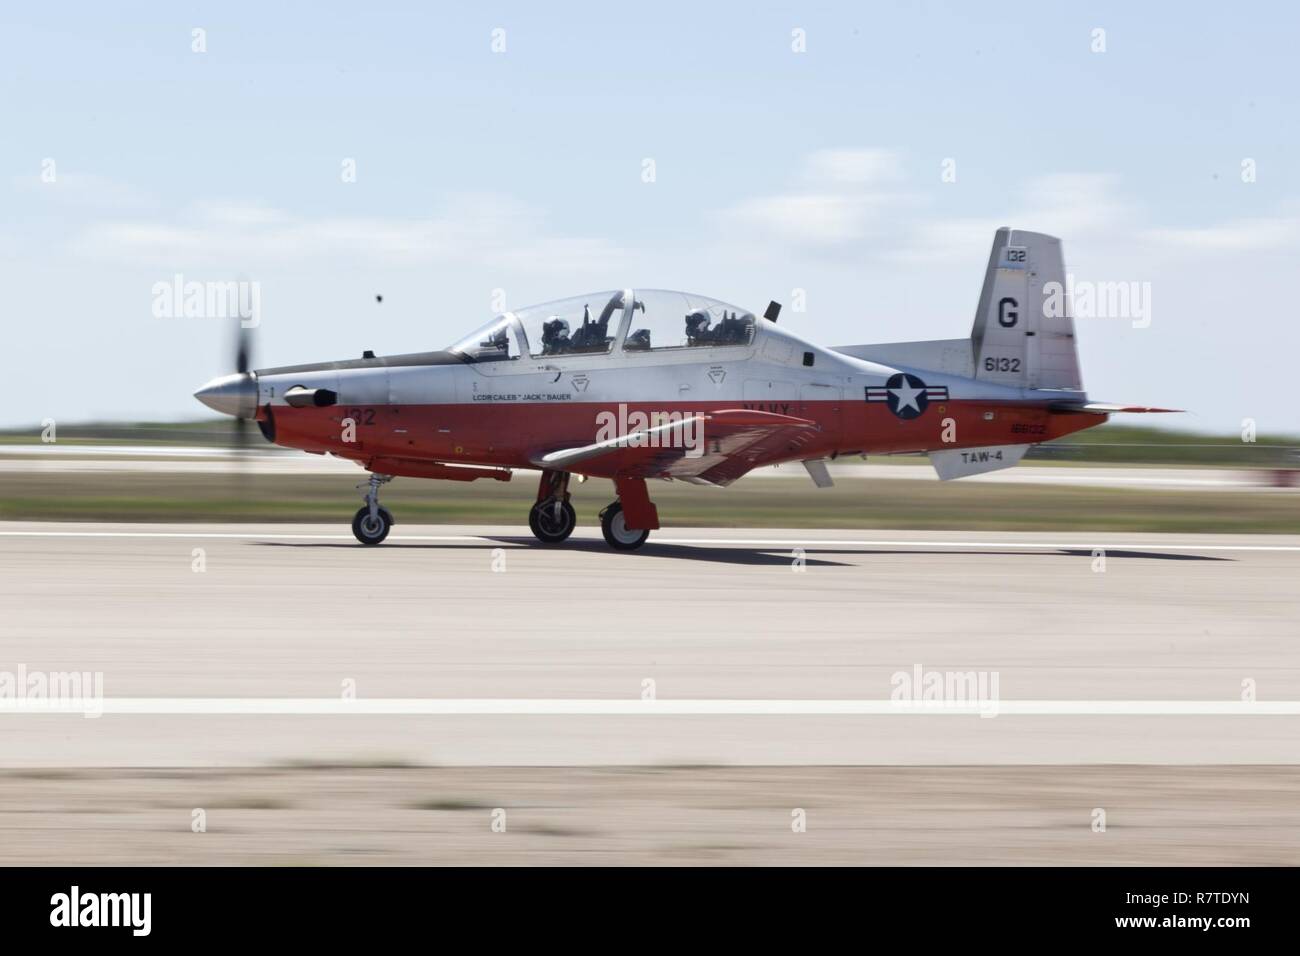 U.S. Marine Corps officers assigned to the Basic Flight Training Course, Training Air Wing Four, land a T-6B training aircraft at Naval Air Station Corpus Christi, Texas, March 20, 2017. The mission of Training Air Wing Four is to provide basic flight training as well as intermediate and advanced flight training using multi-engine aircraft. Stock Photo